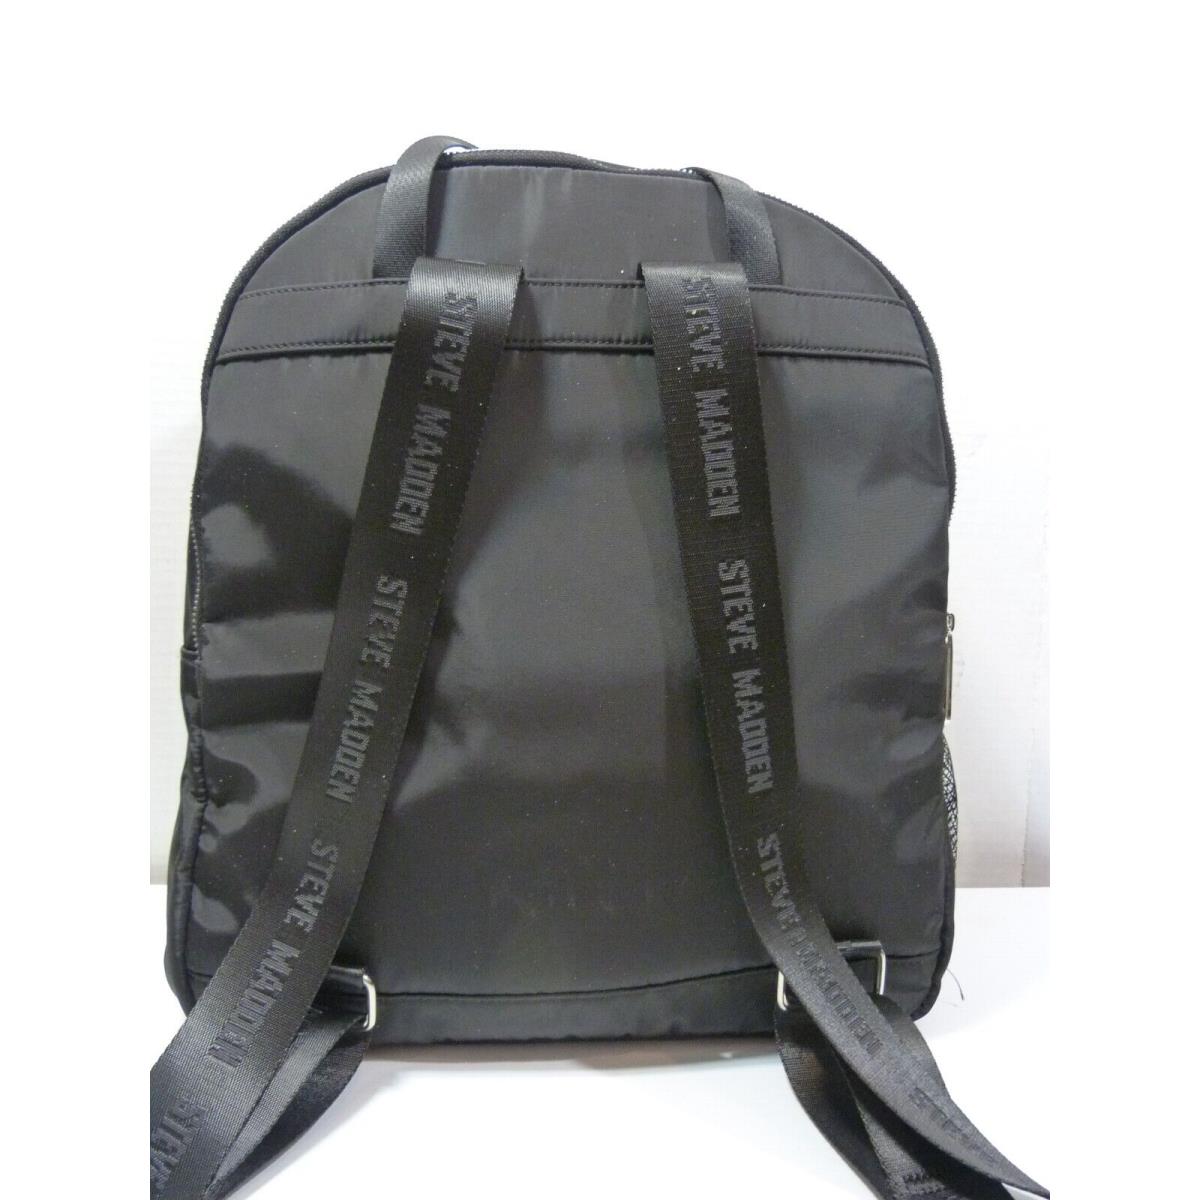 Stunning and Roomy Steve Madden Bpendy Nylon Backpack with Front/ Side Pockets